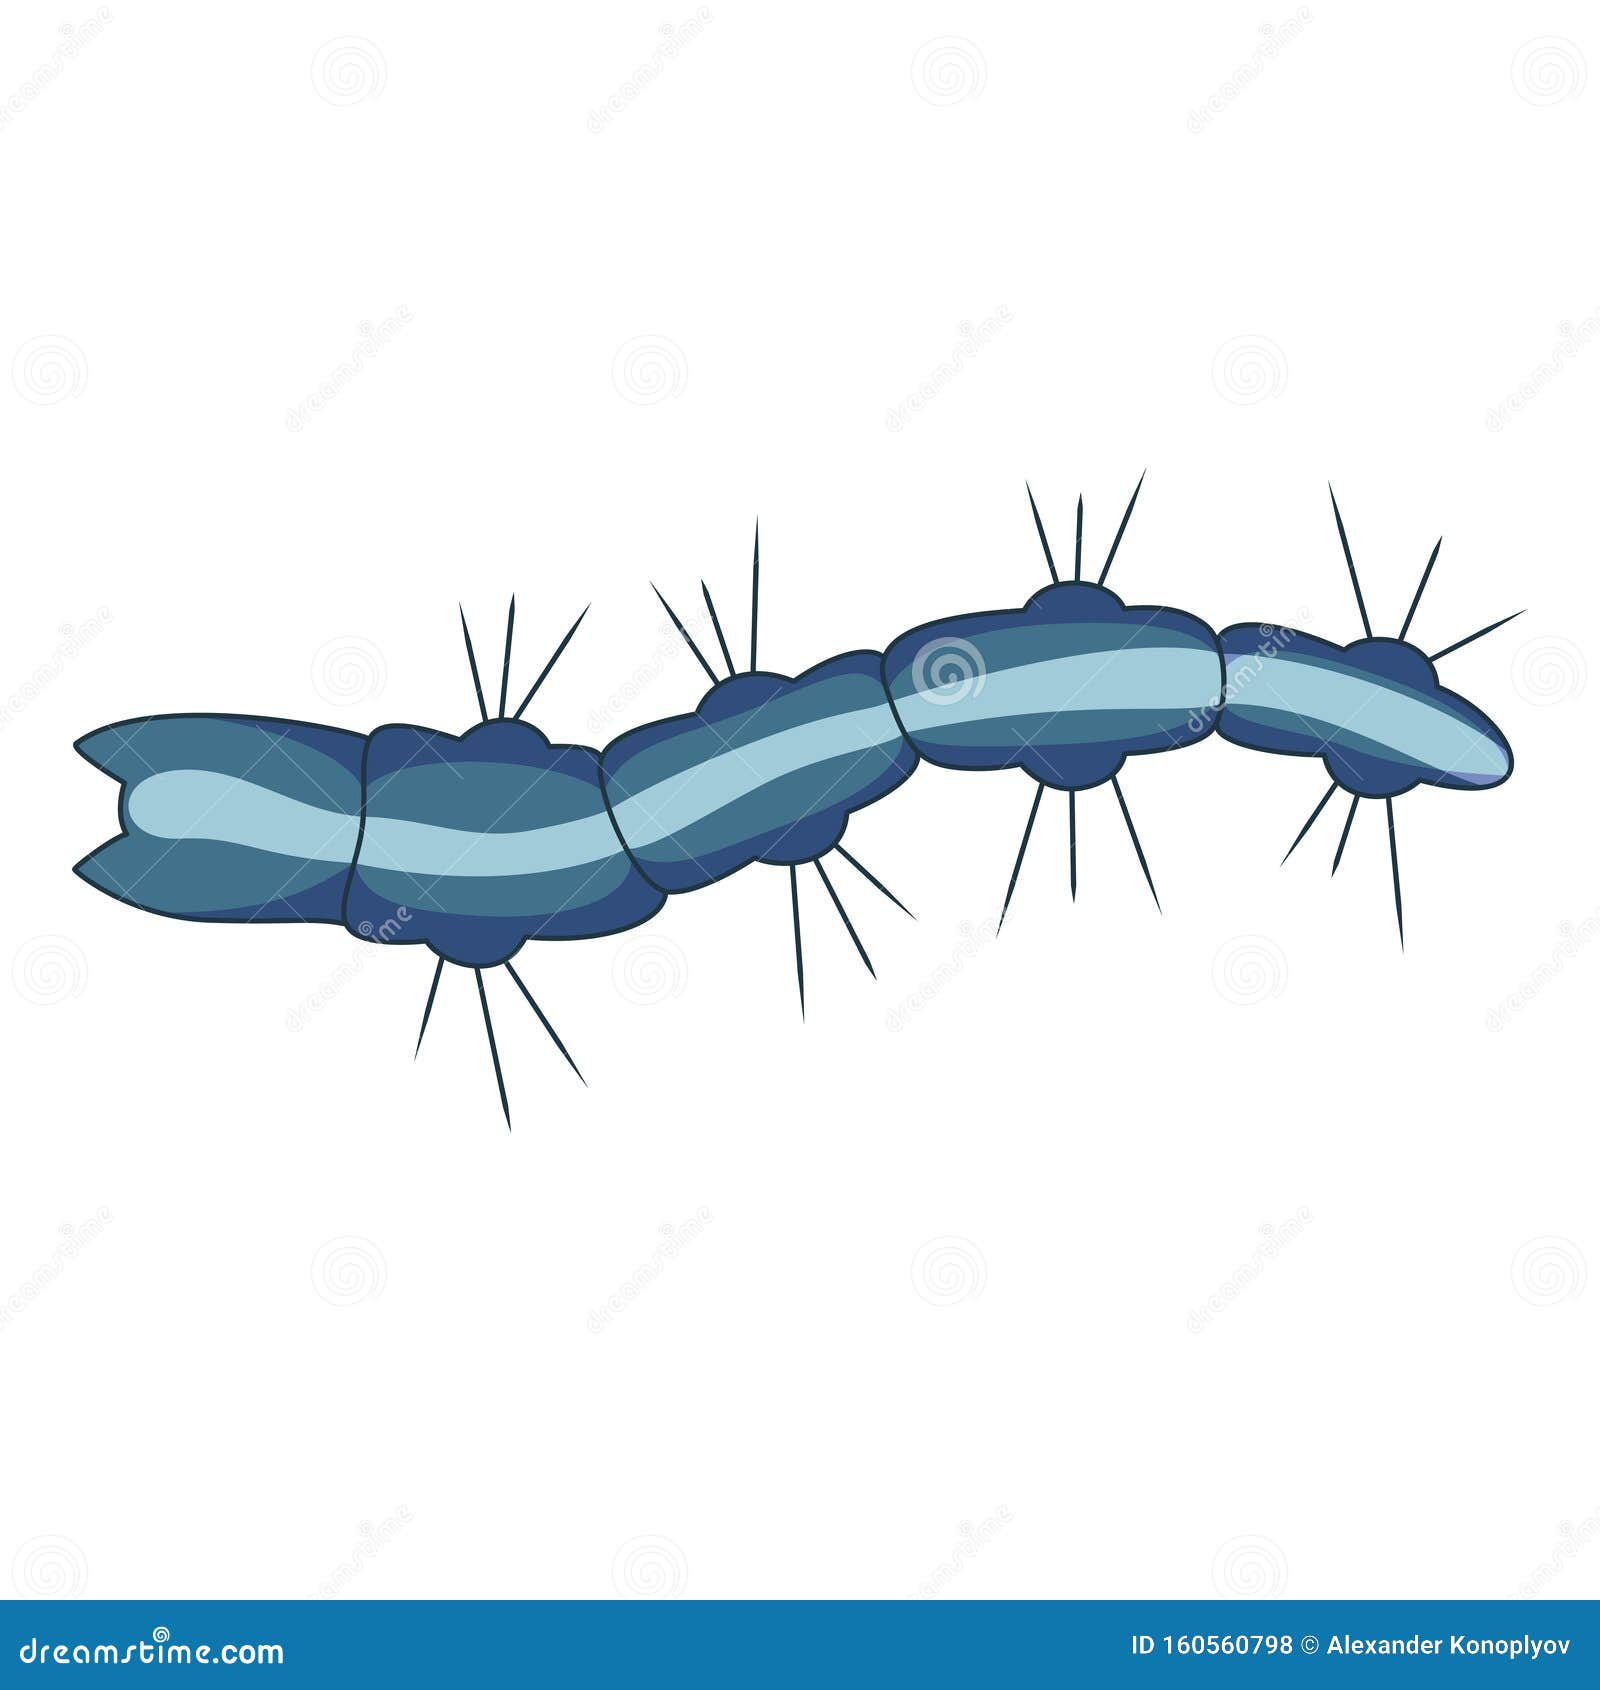 caterpillar blue insect icon, nature and entomology